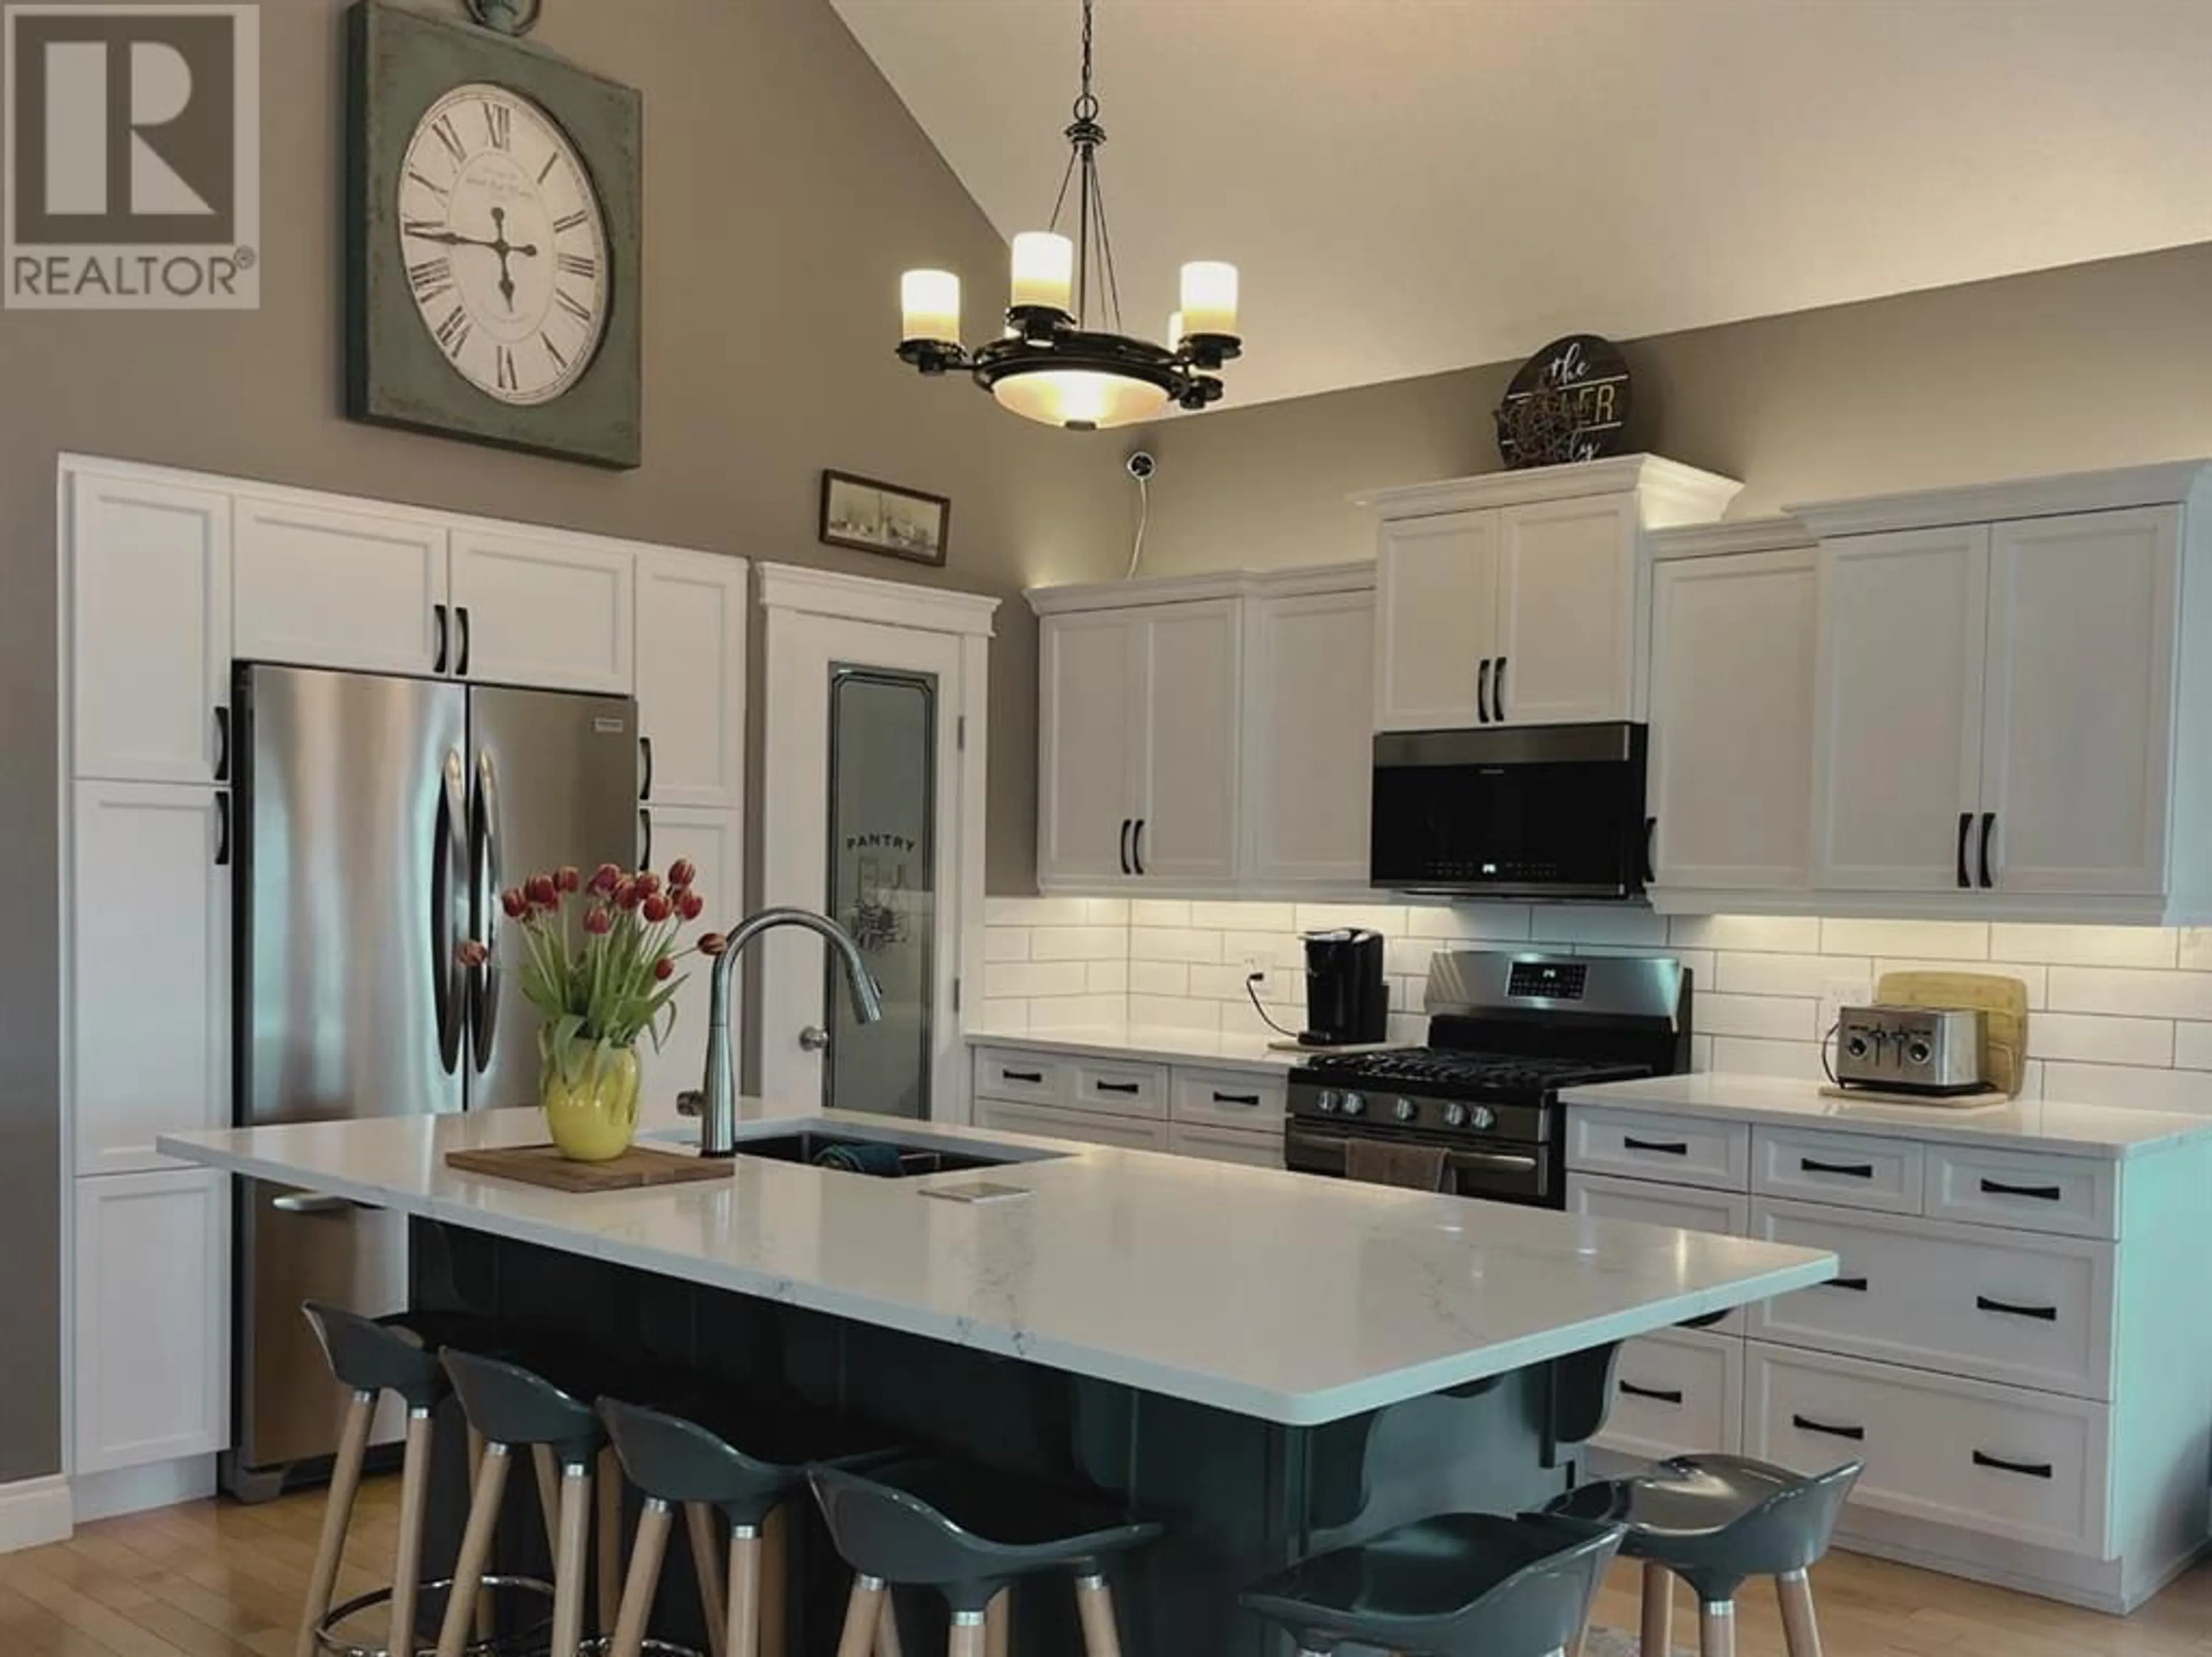 Contemporary kitchen for 3 441066 RR 65A, Rural Wainwright No. 61, M.D. of Alberta T9W1S9